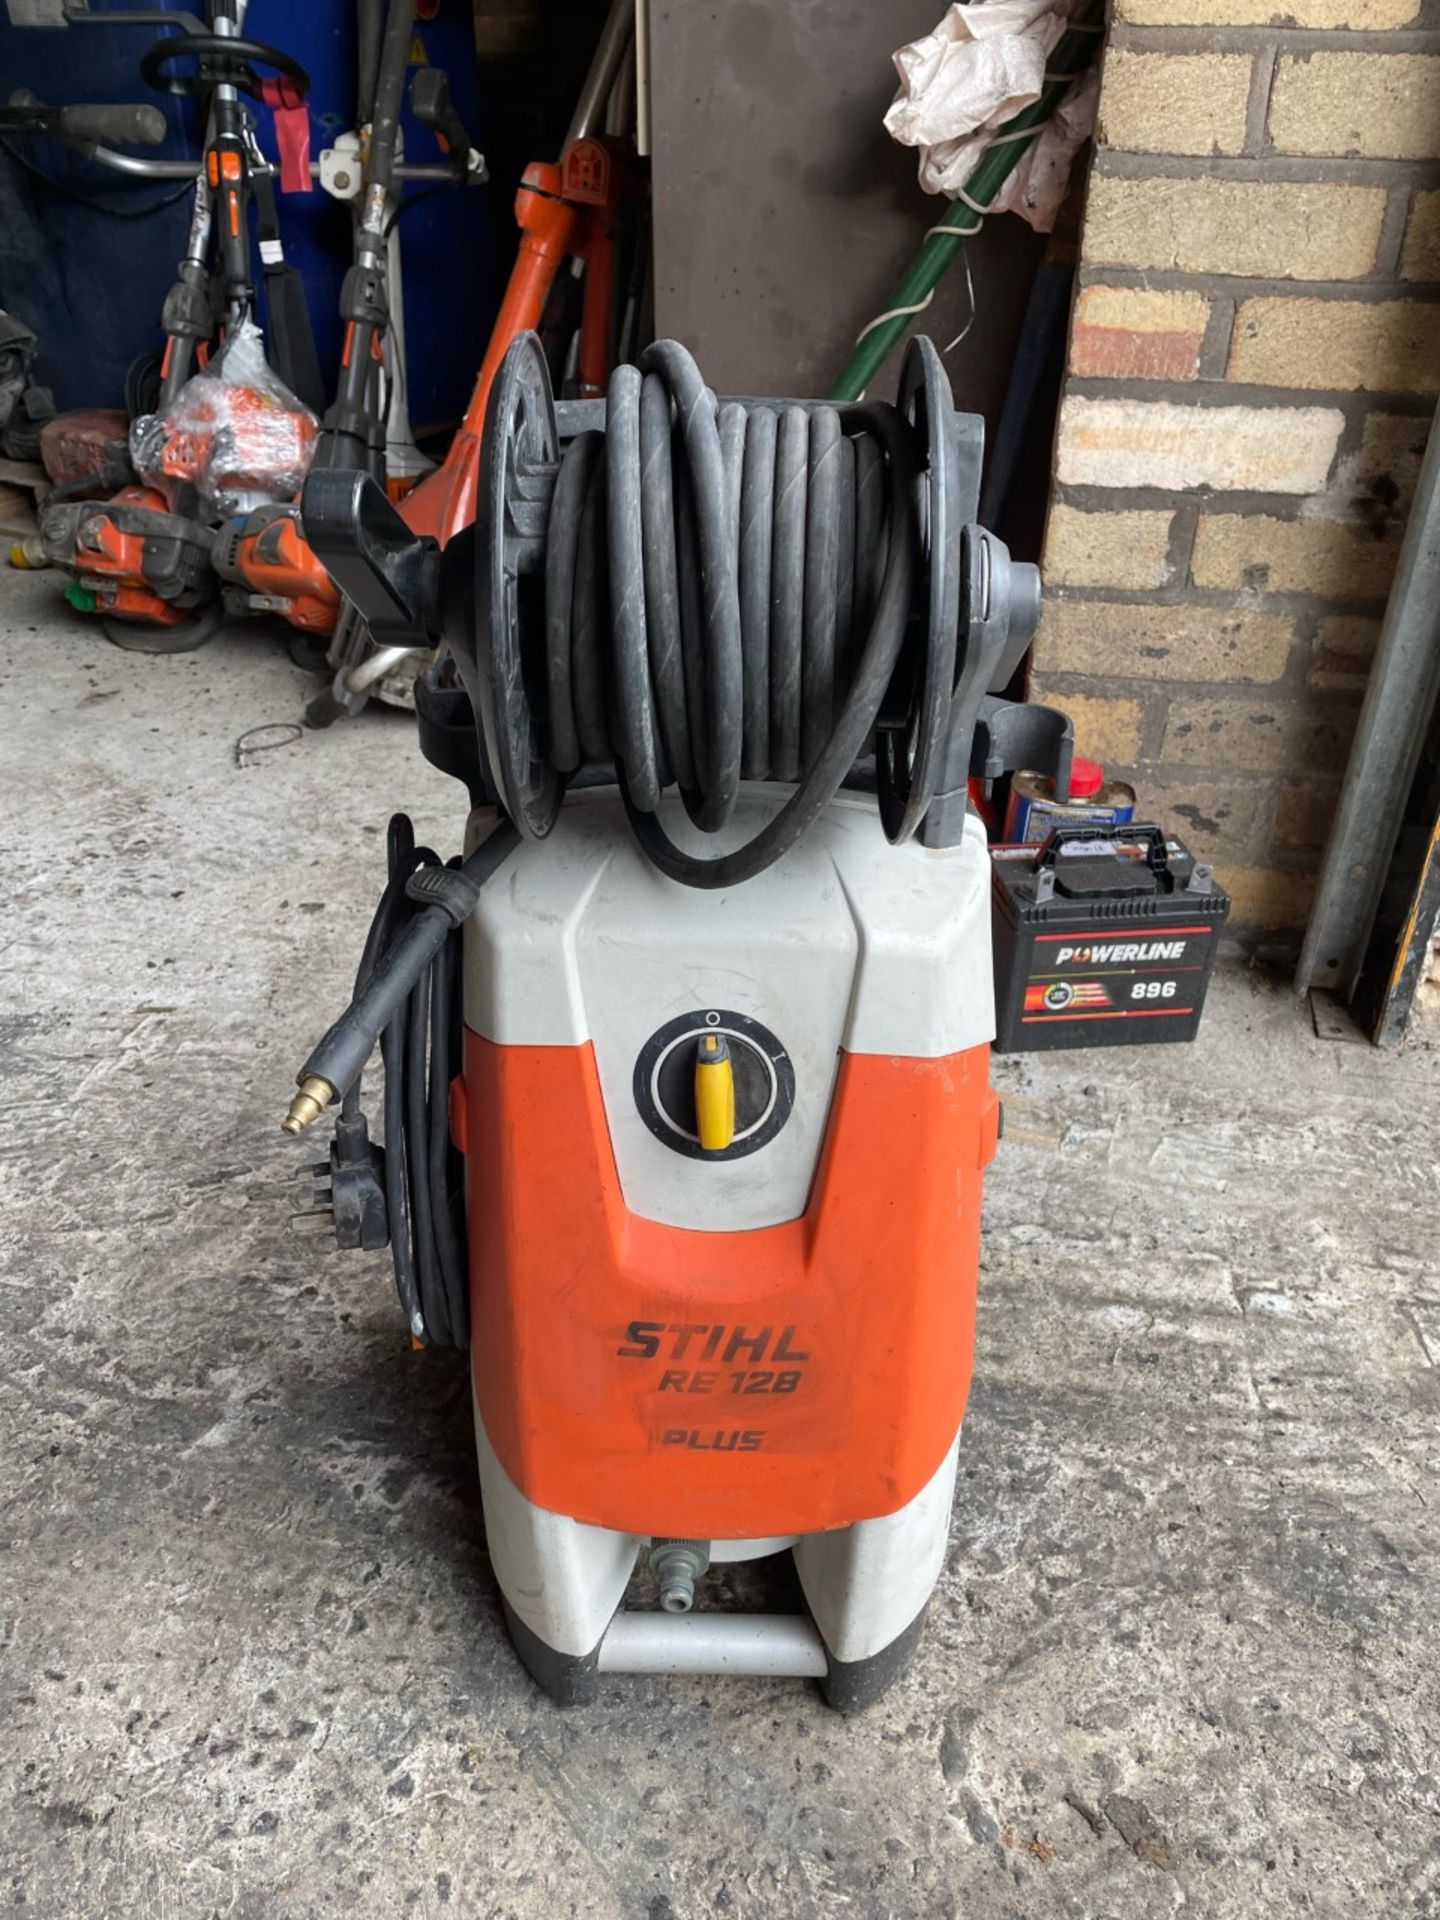 Sthil RE128 plus power wash full working order - Image 2 of 2